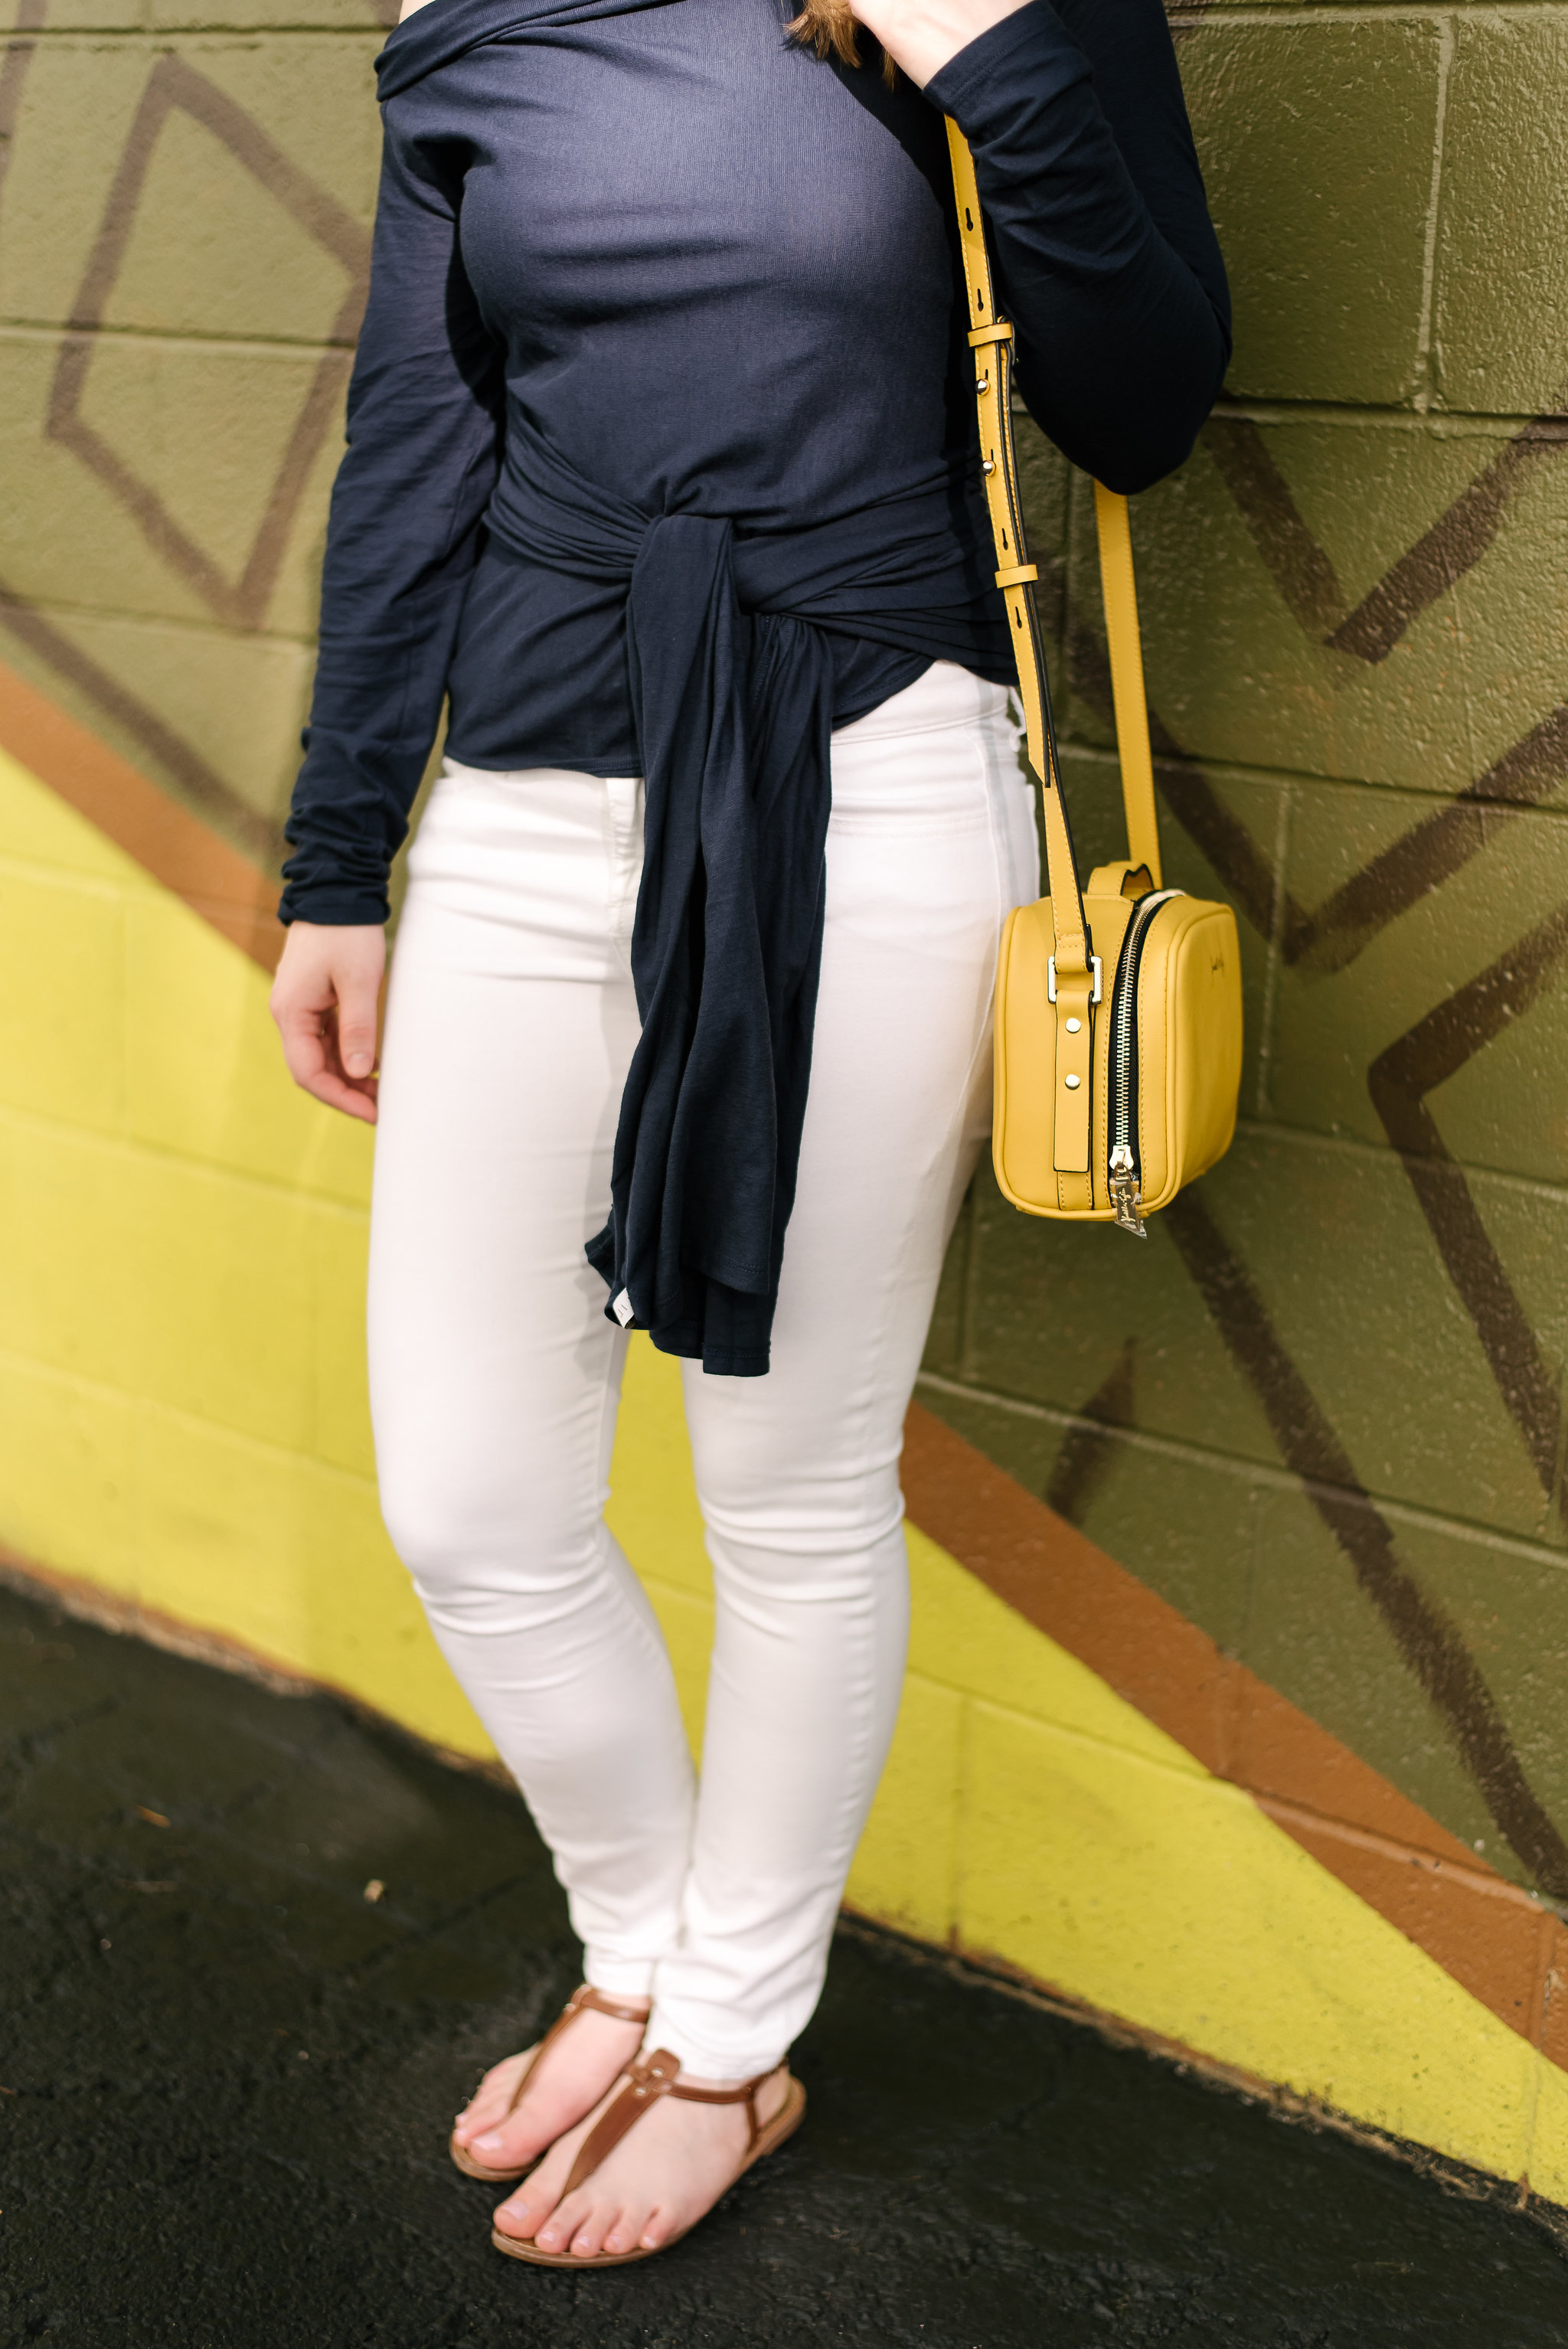 Playing with an Origami Wrap | Something Good, @danaerinw , women, fashion, clothing, style, clothes, women's fashion, fall fashion, white jeans, white denim, navy wrap top, yellow crossbody bag, sandals